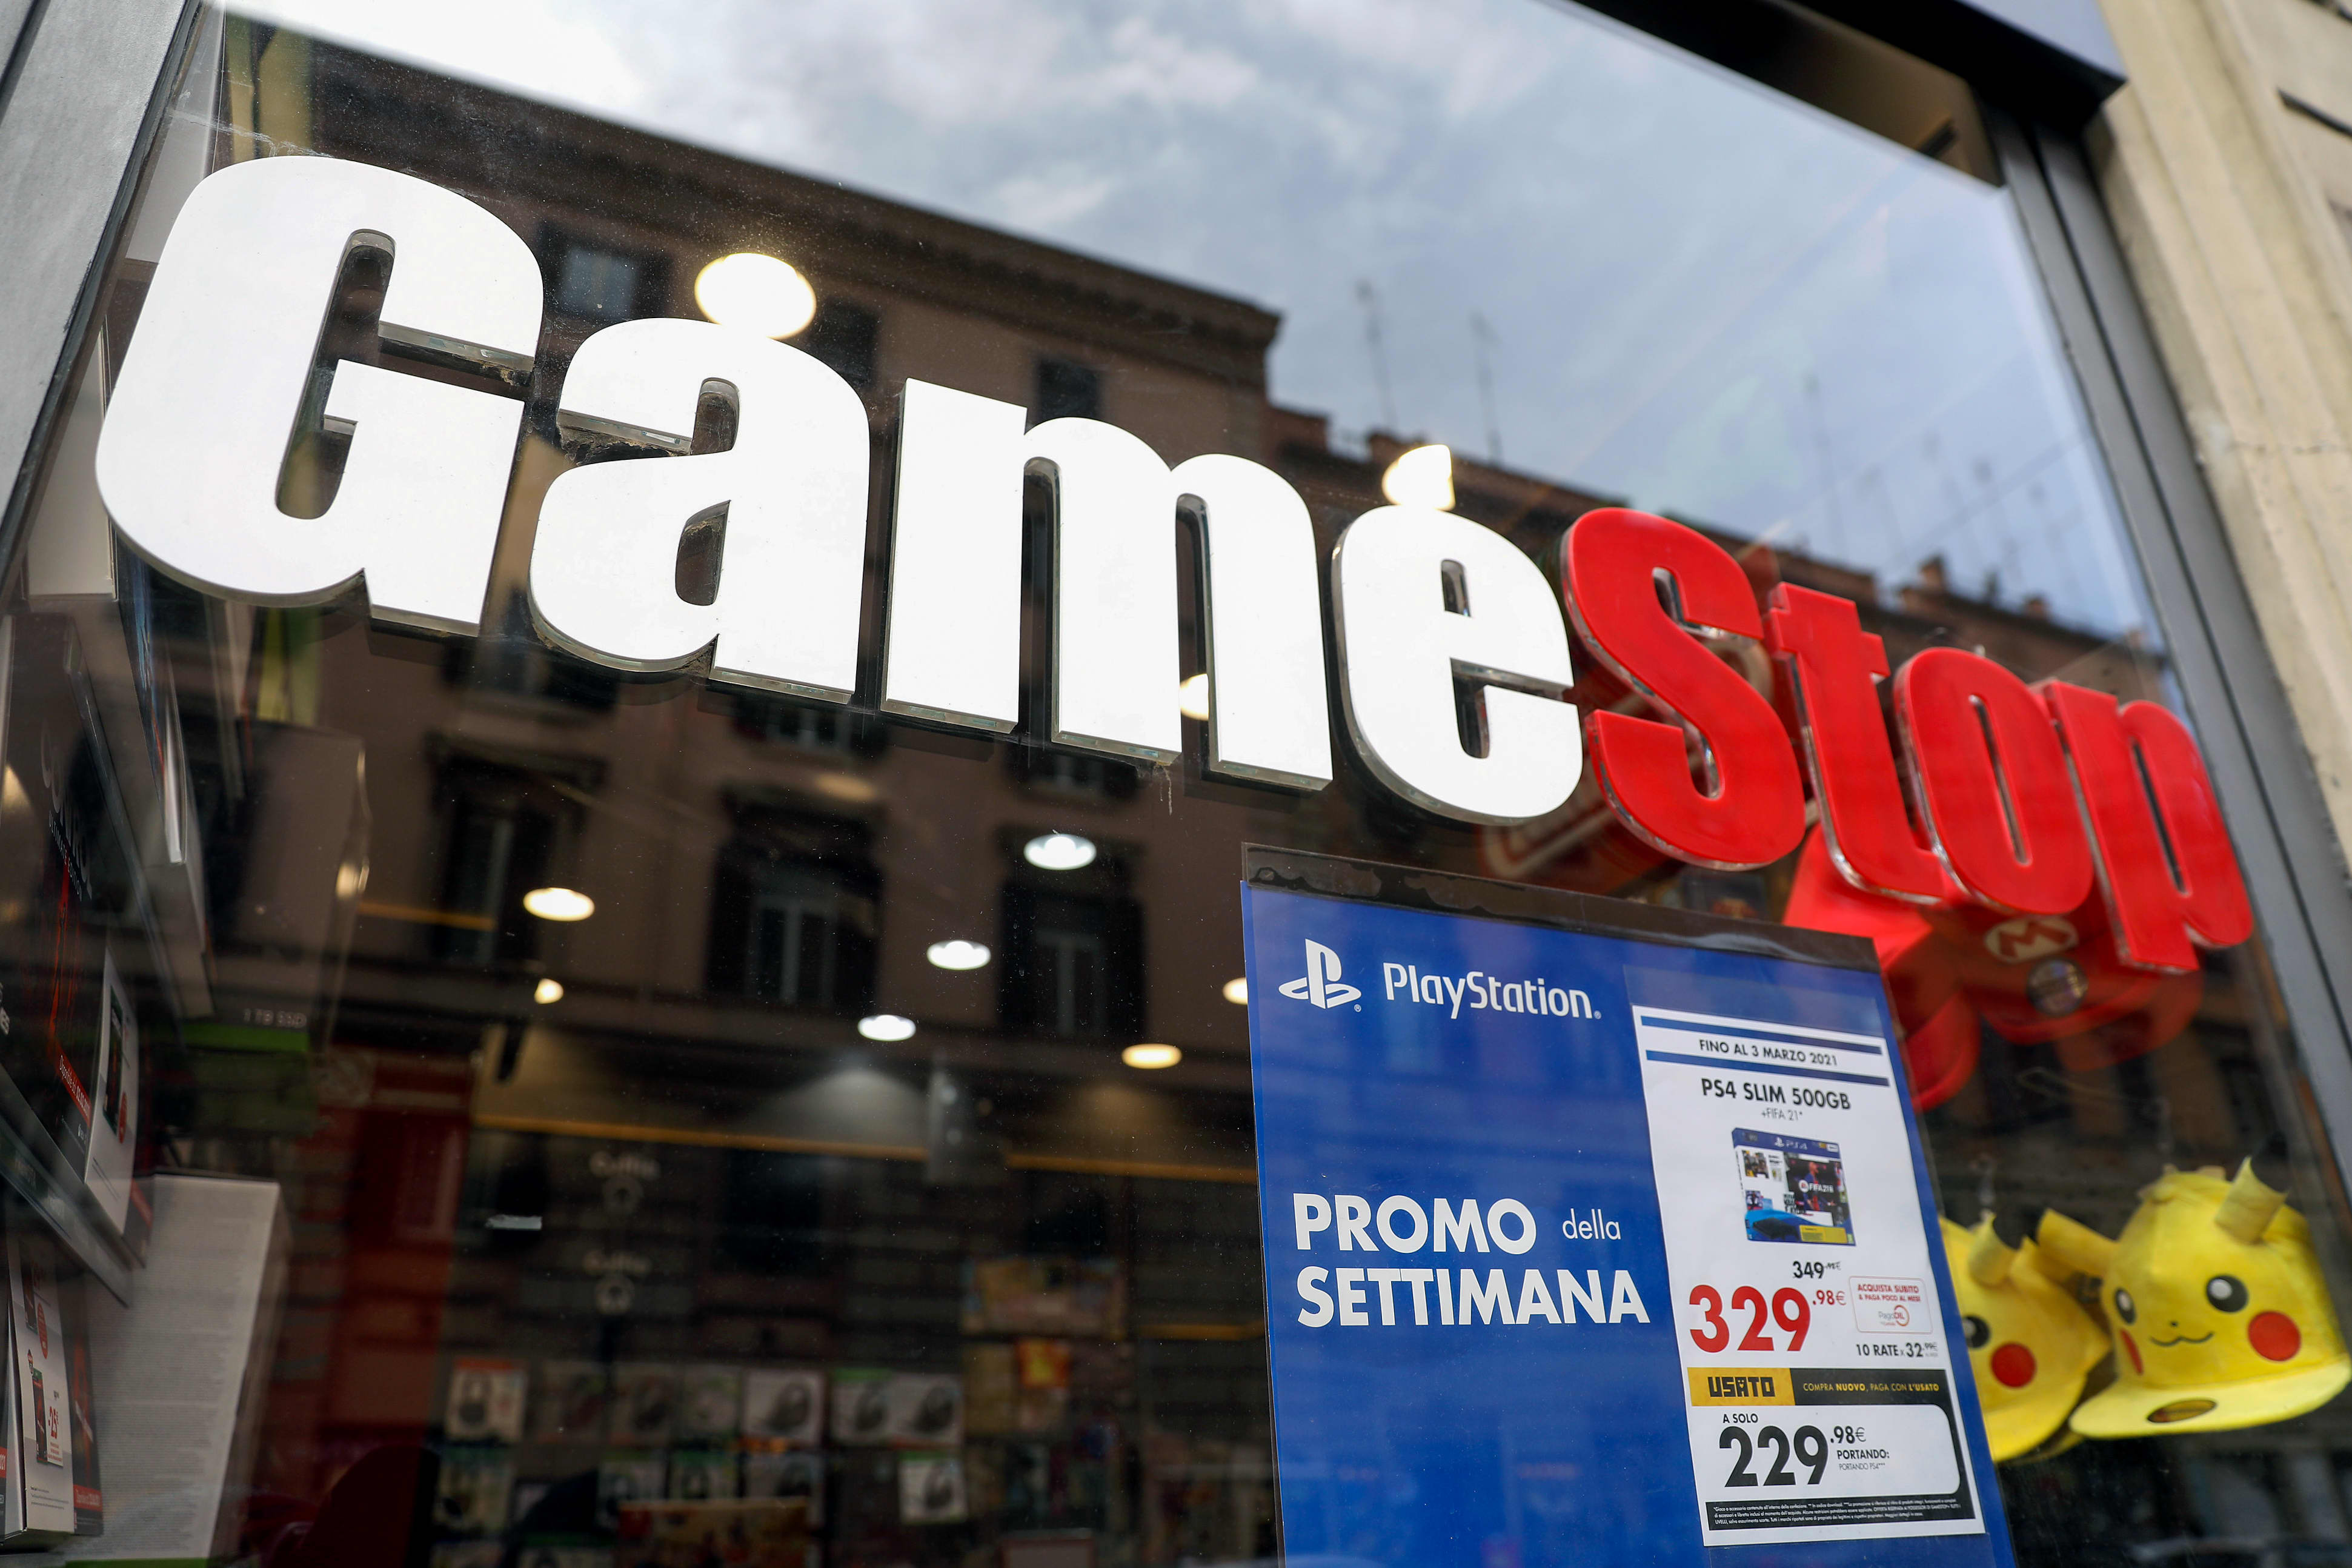 Melvin Capital lost more than 50% after betting against GameStop: WSJ